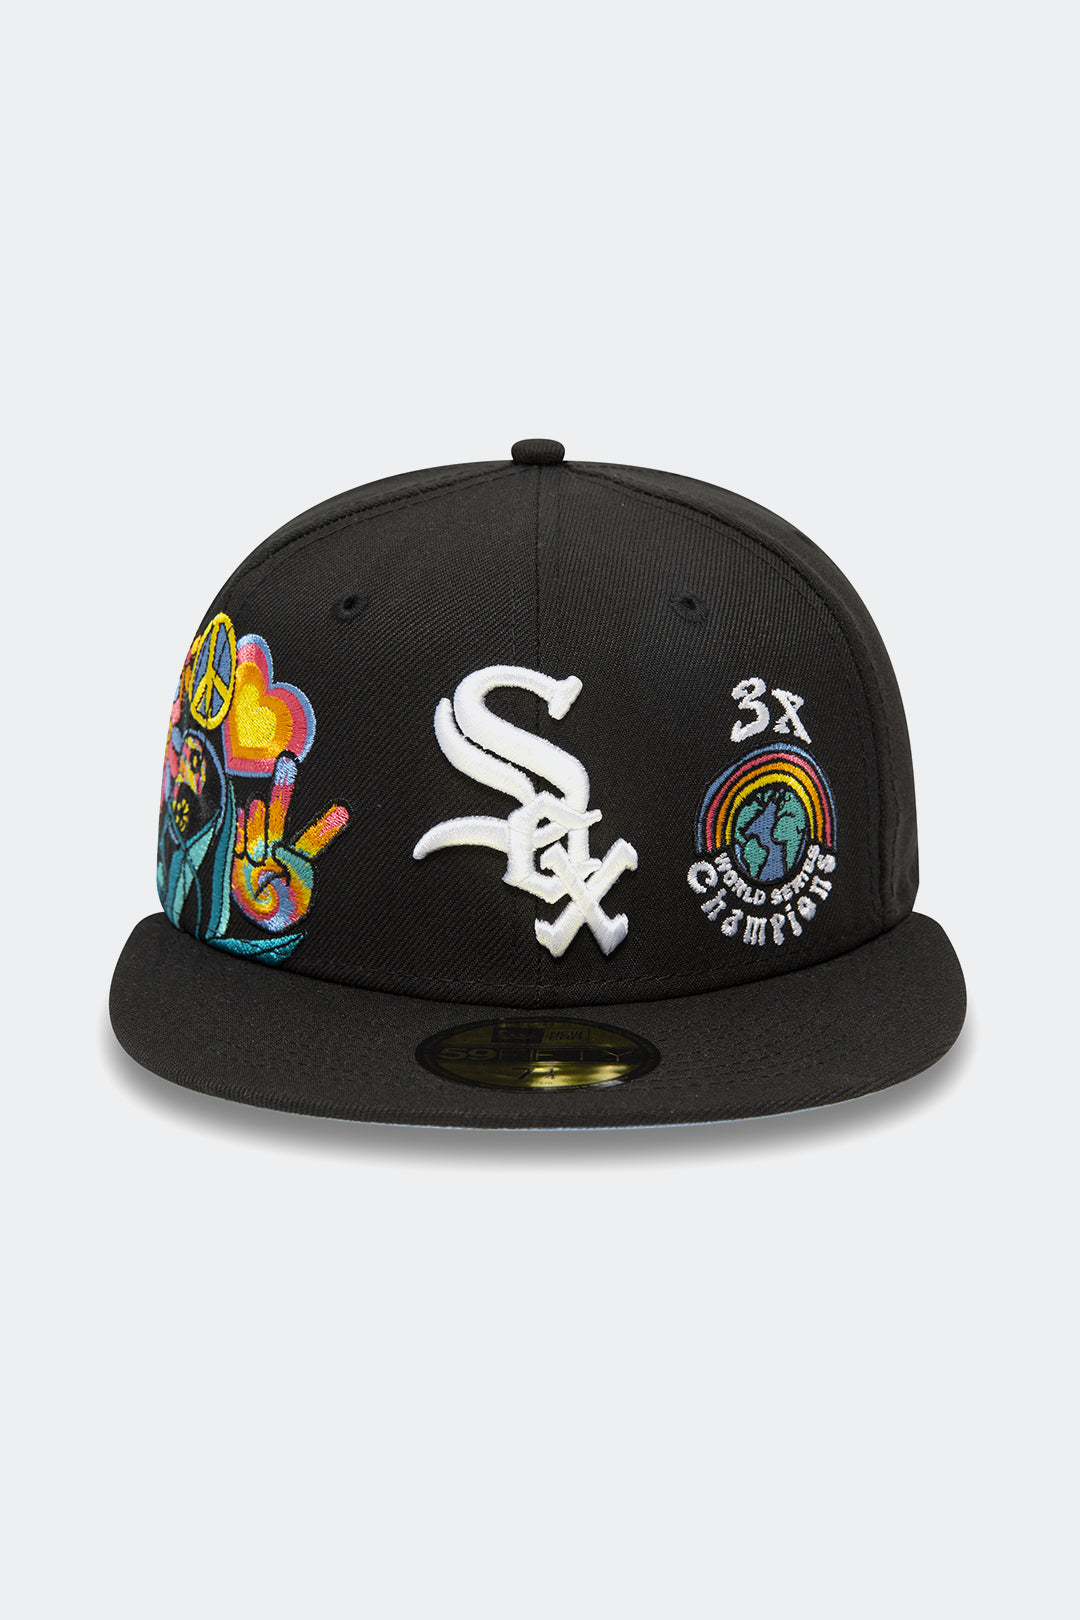 NEW ERA 59FIFTY CHICAGO WHITE SOX "GROOVY" - HYPE